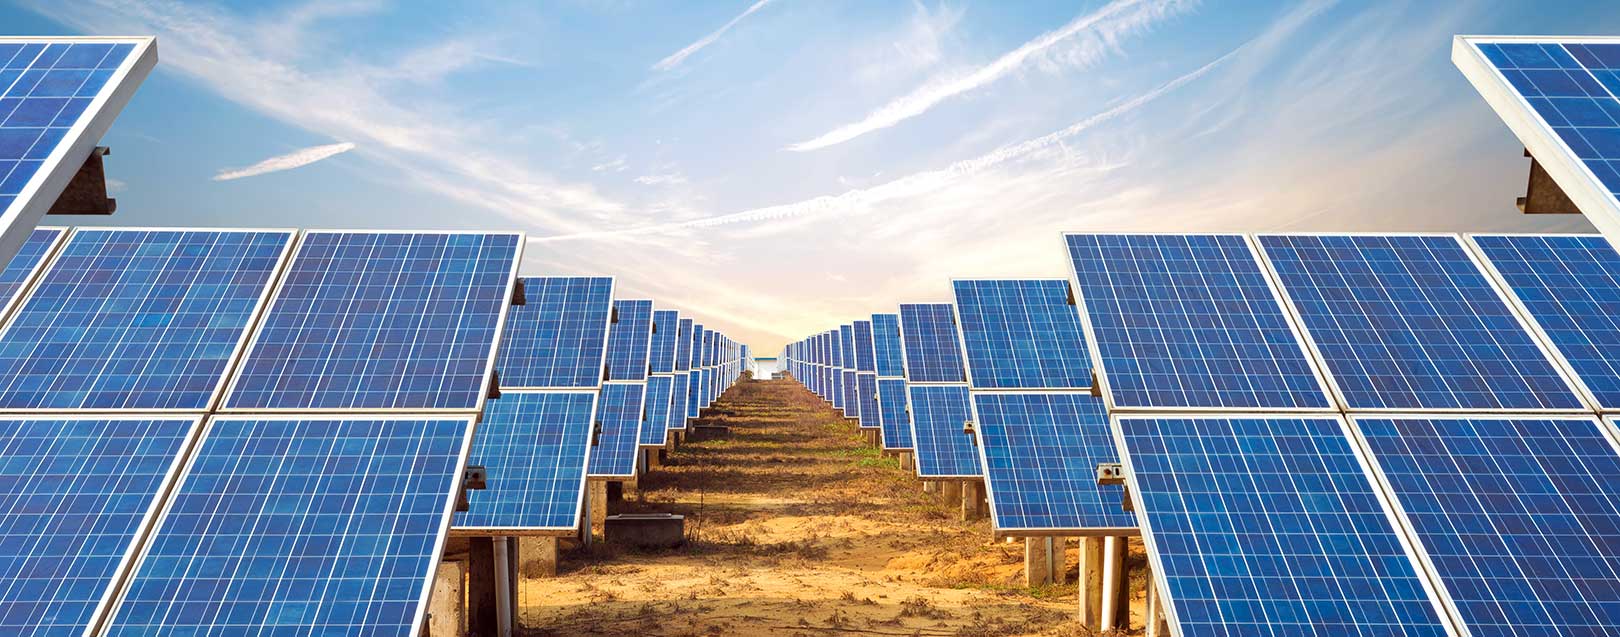 Solar generation capacity to cross 20,000 MW in next 15 months